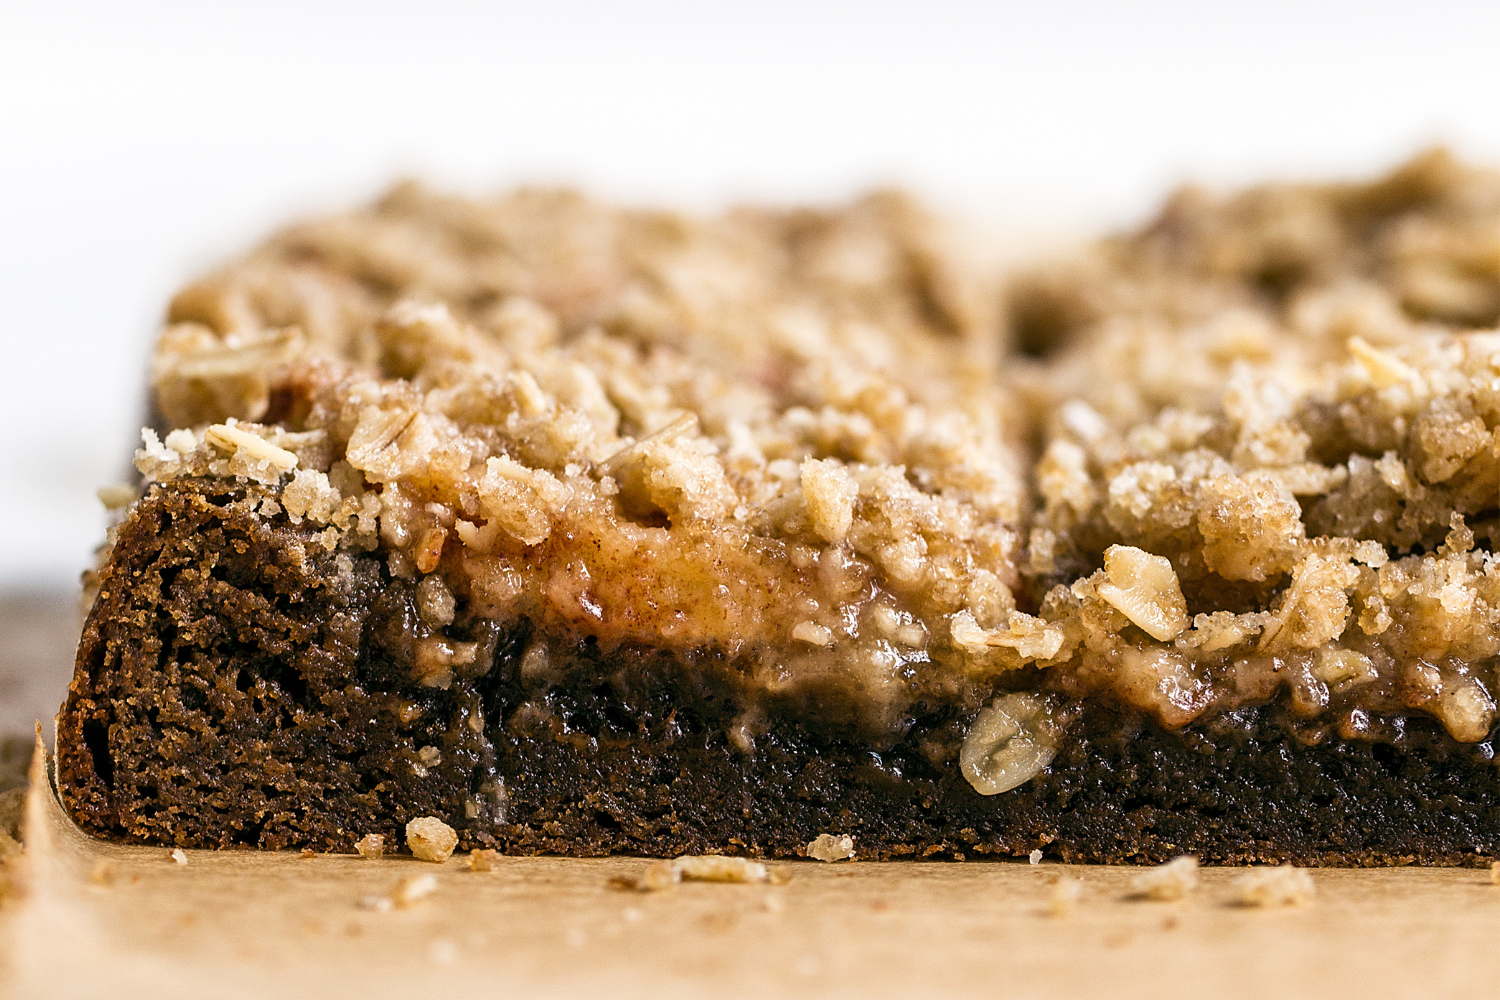 close up look at the cookie bars underneath the apple and oat streusel